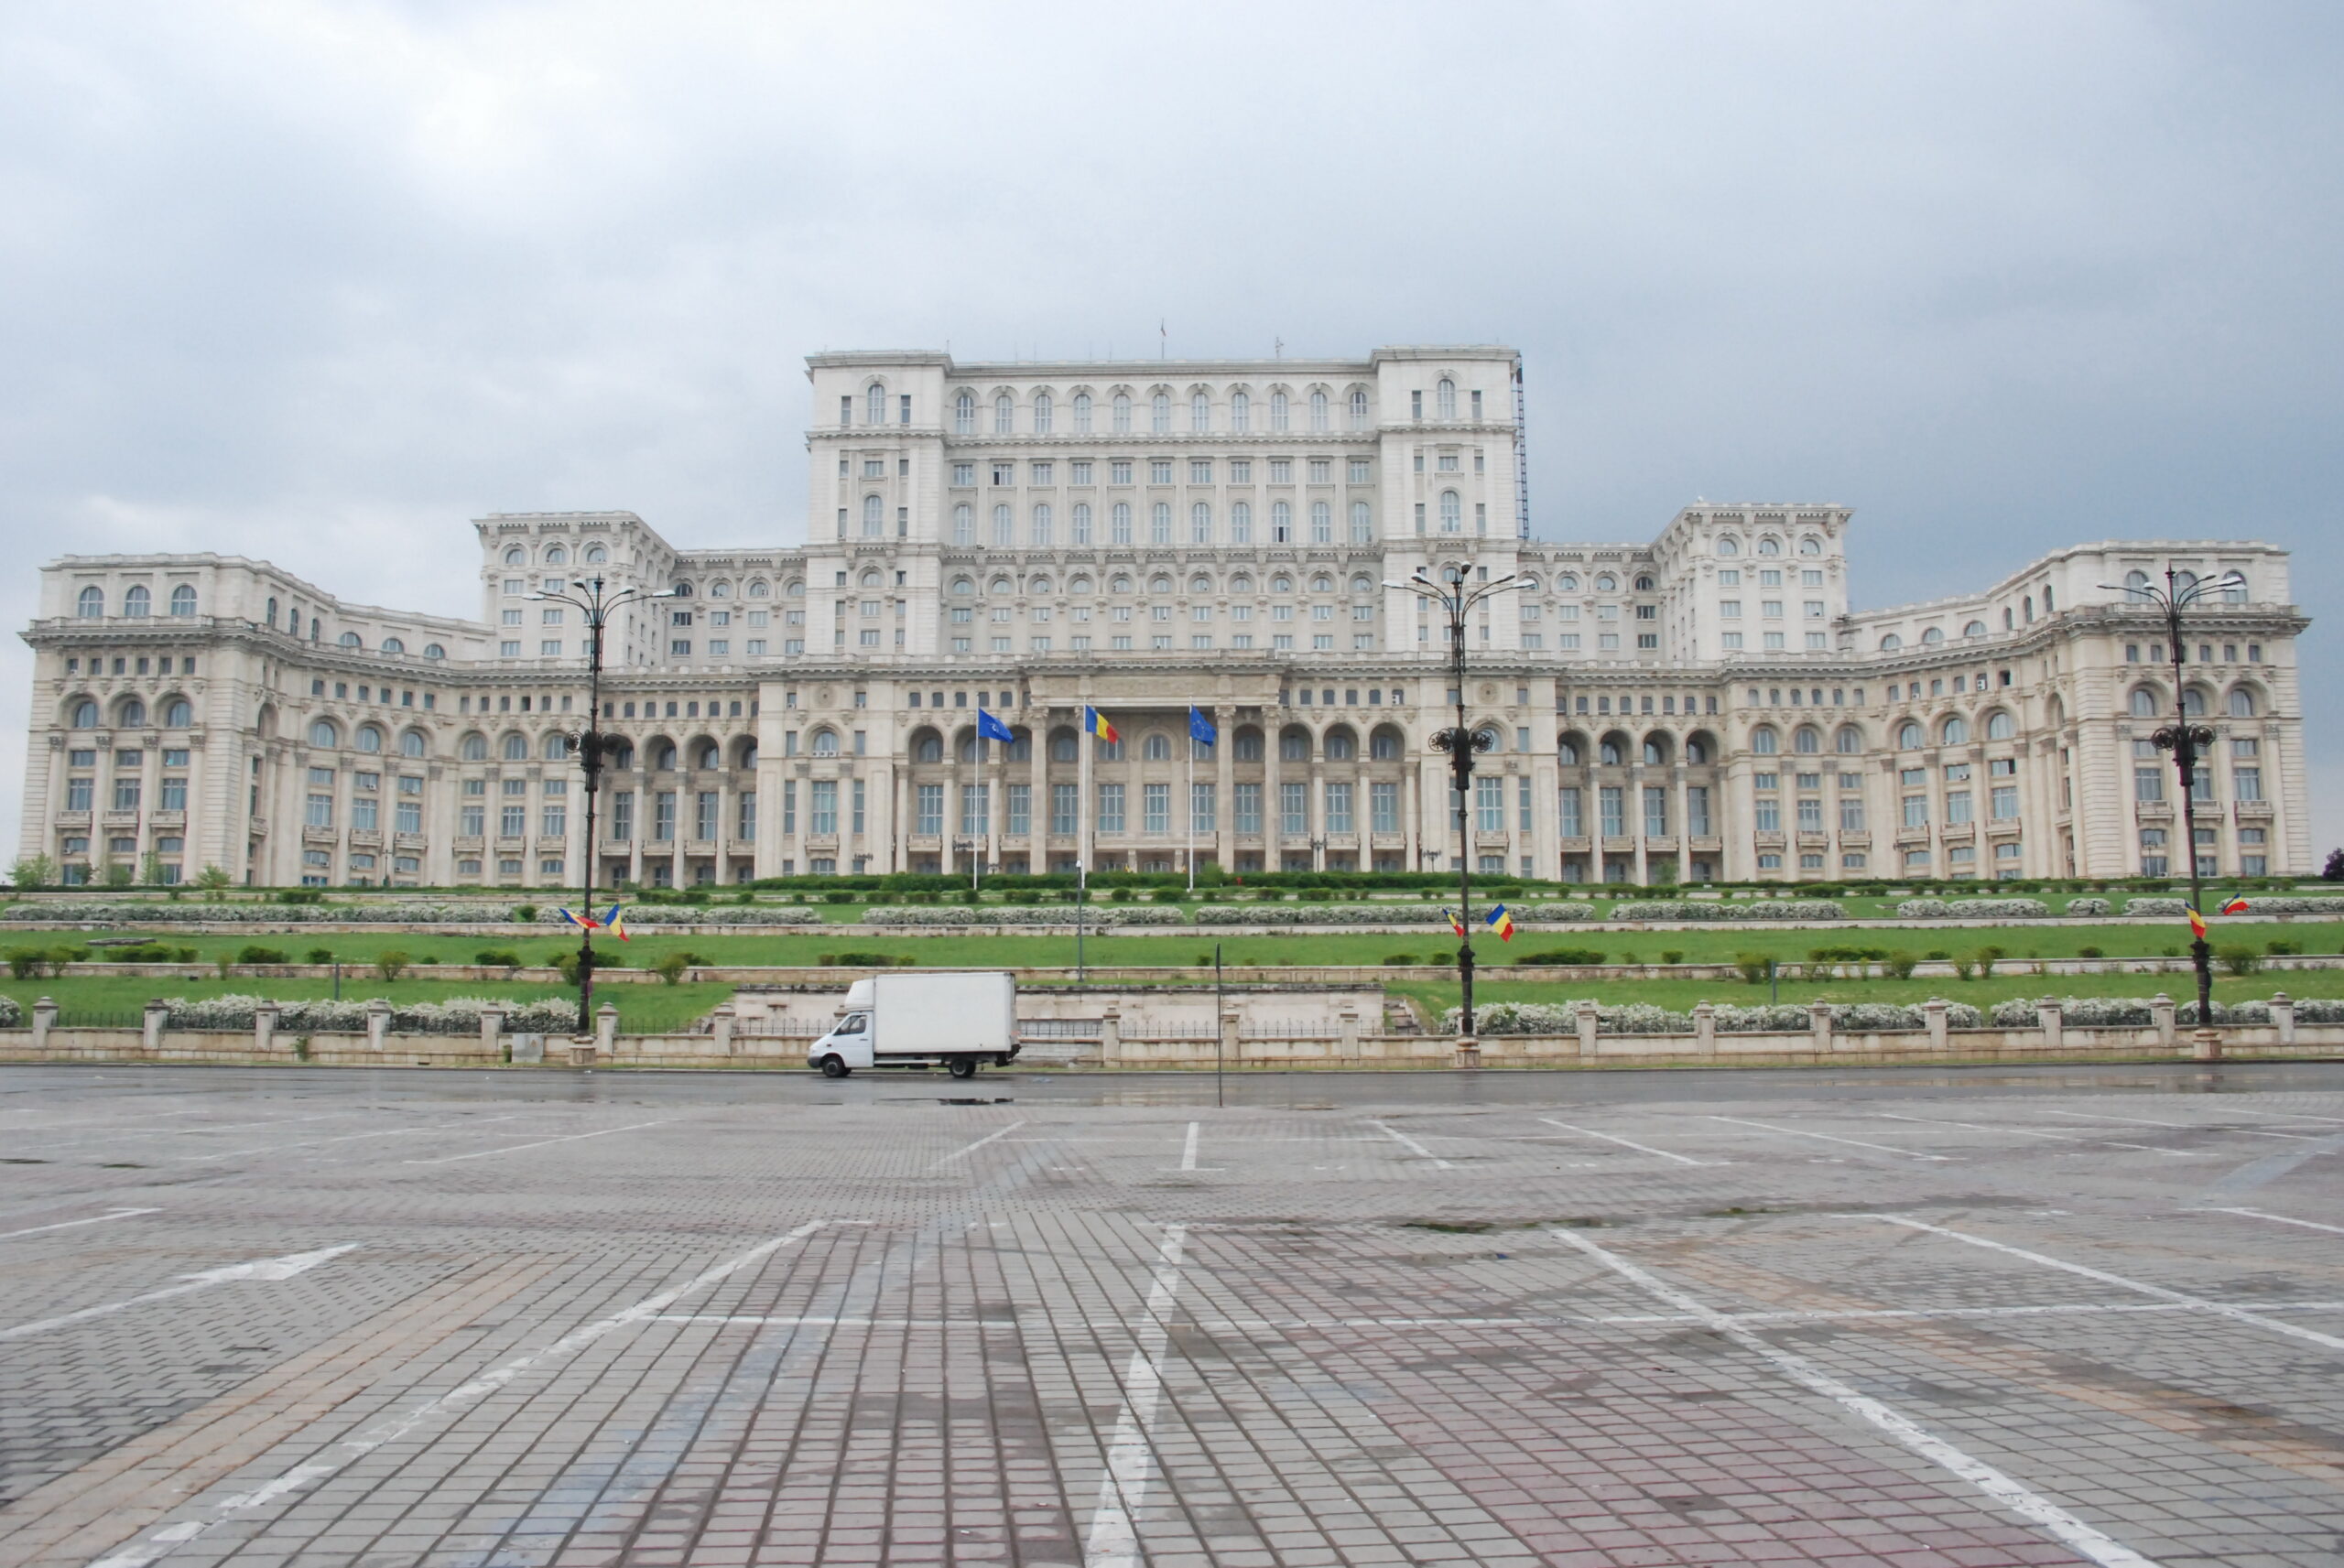 The largest building in Romania